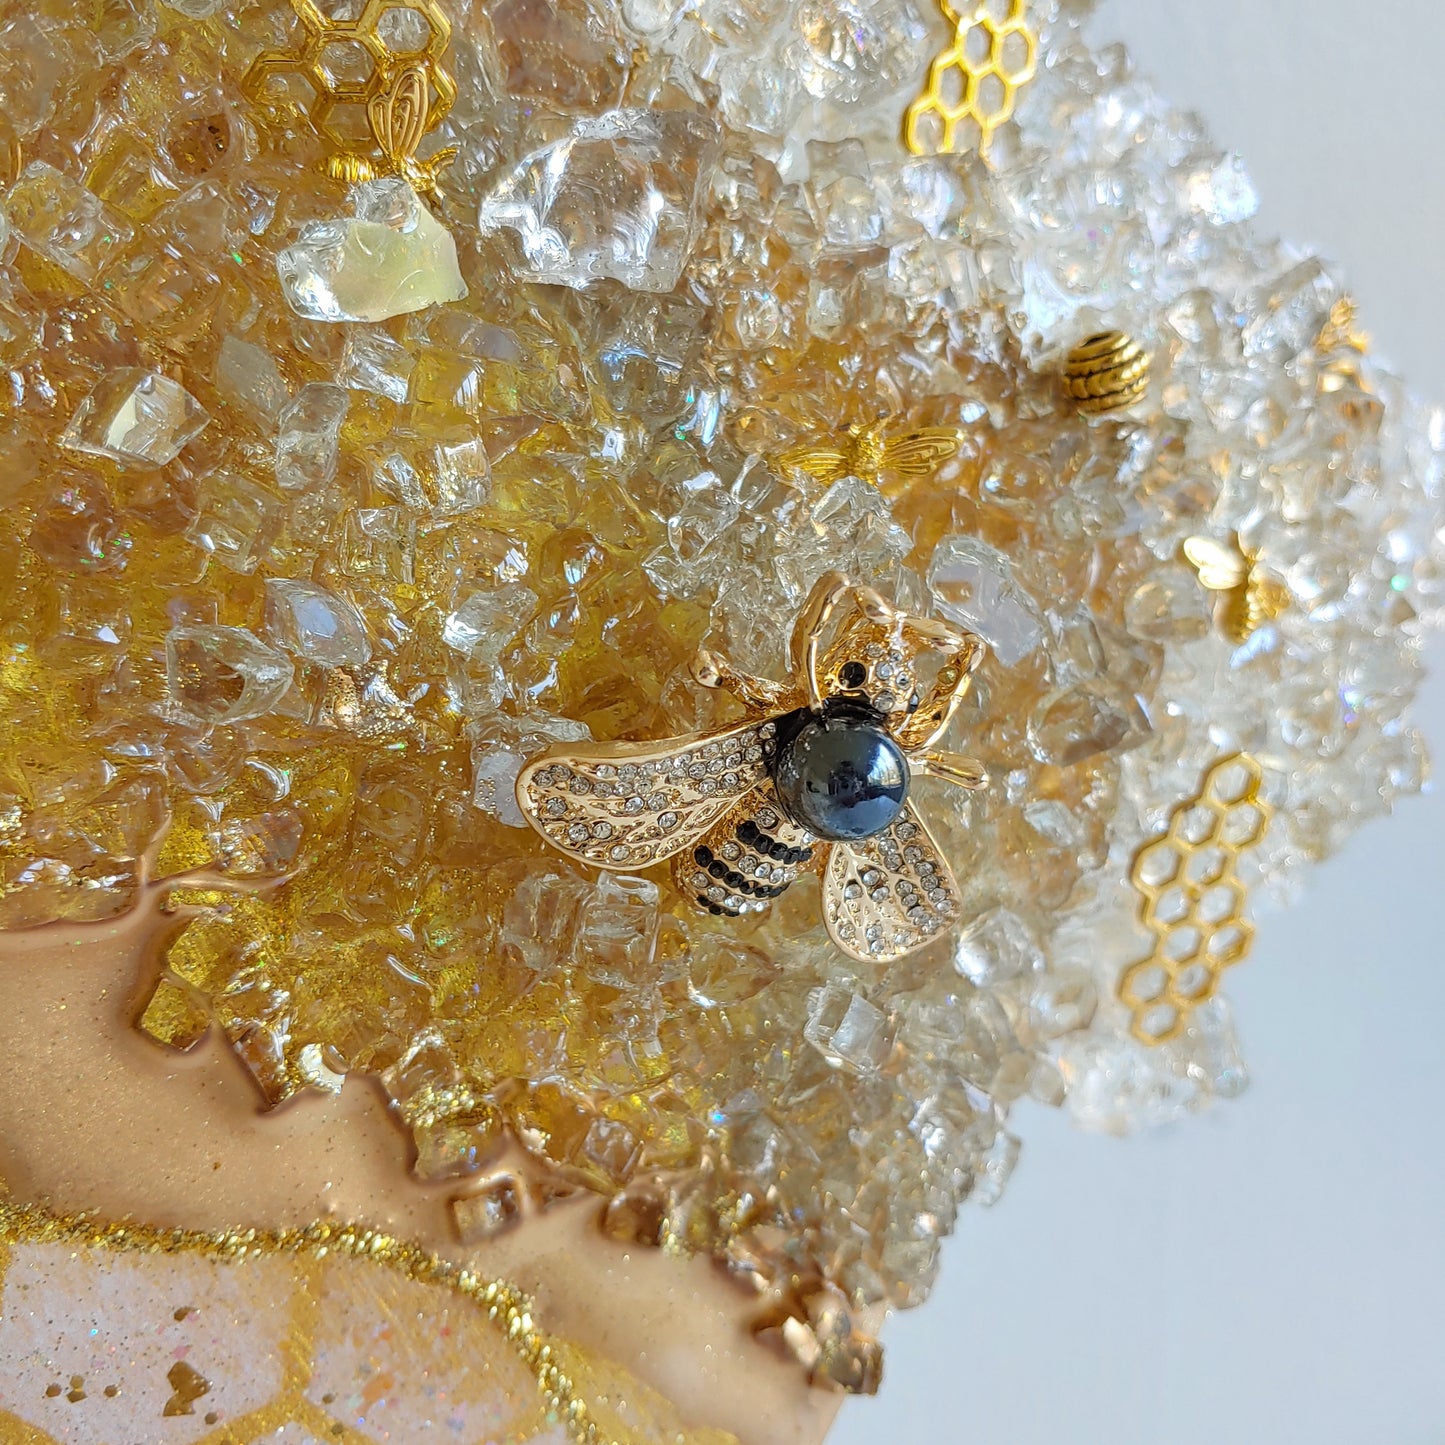 Stunning glass beehive art on wood with glass, resin and bees! 24 inch round